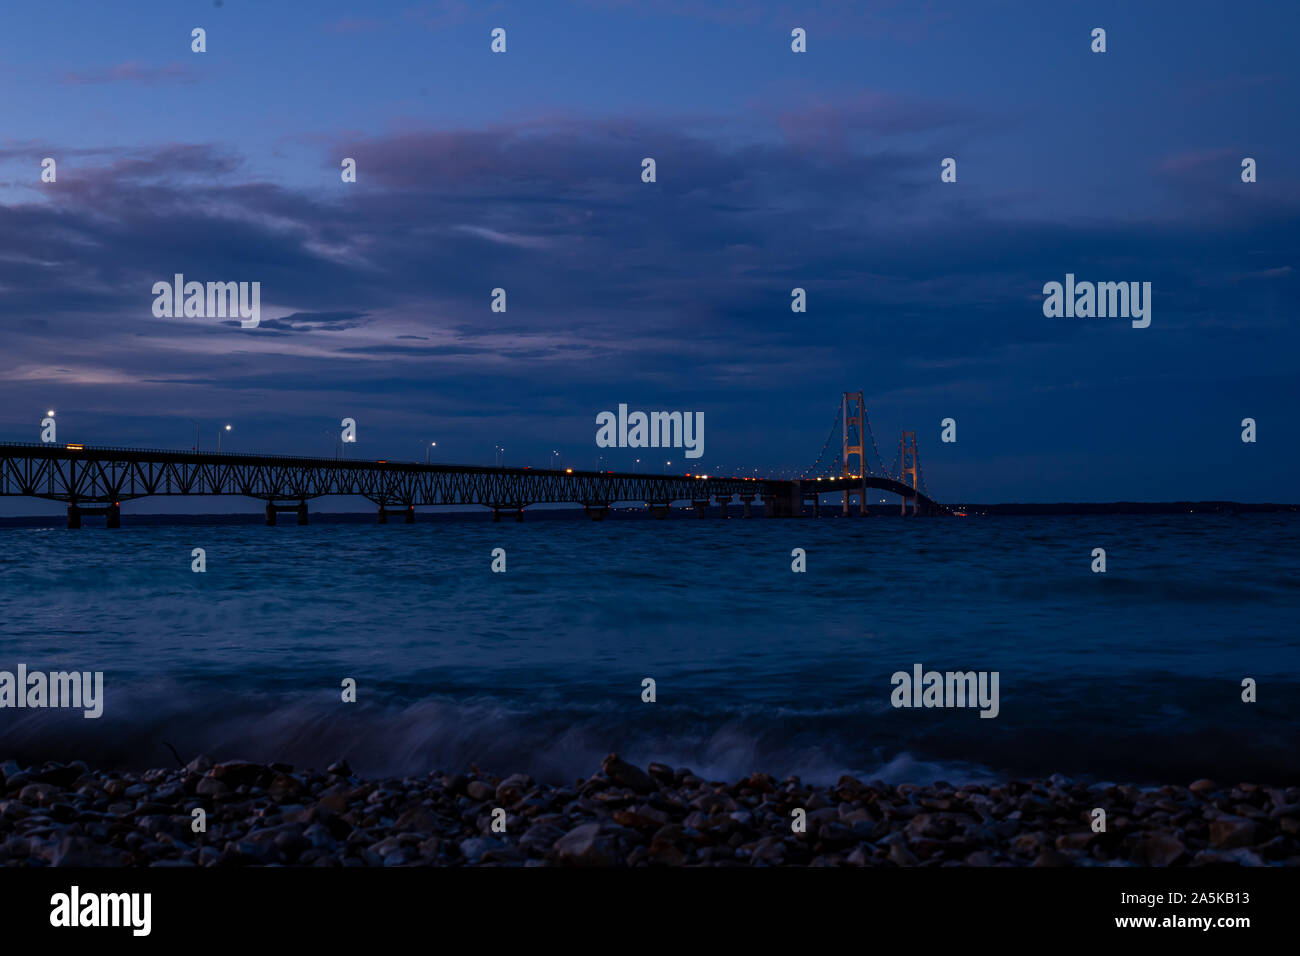 Colored lights decorate the Mackinac Bridge spanning the Straits of Mackinac between the upper and lower peninsulas of Michigan, USA. Stock Photo